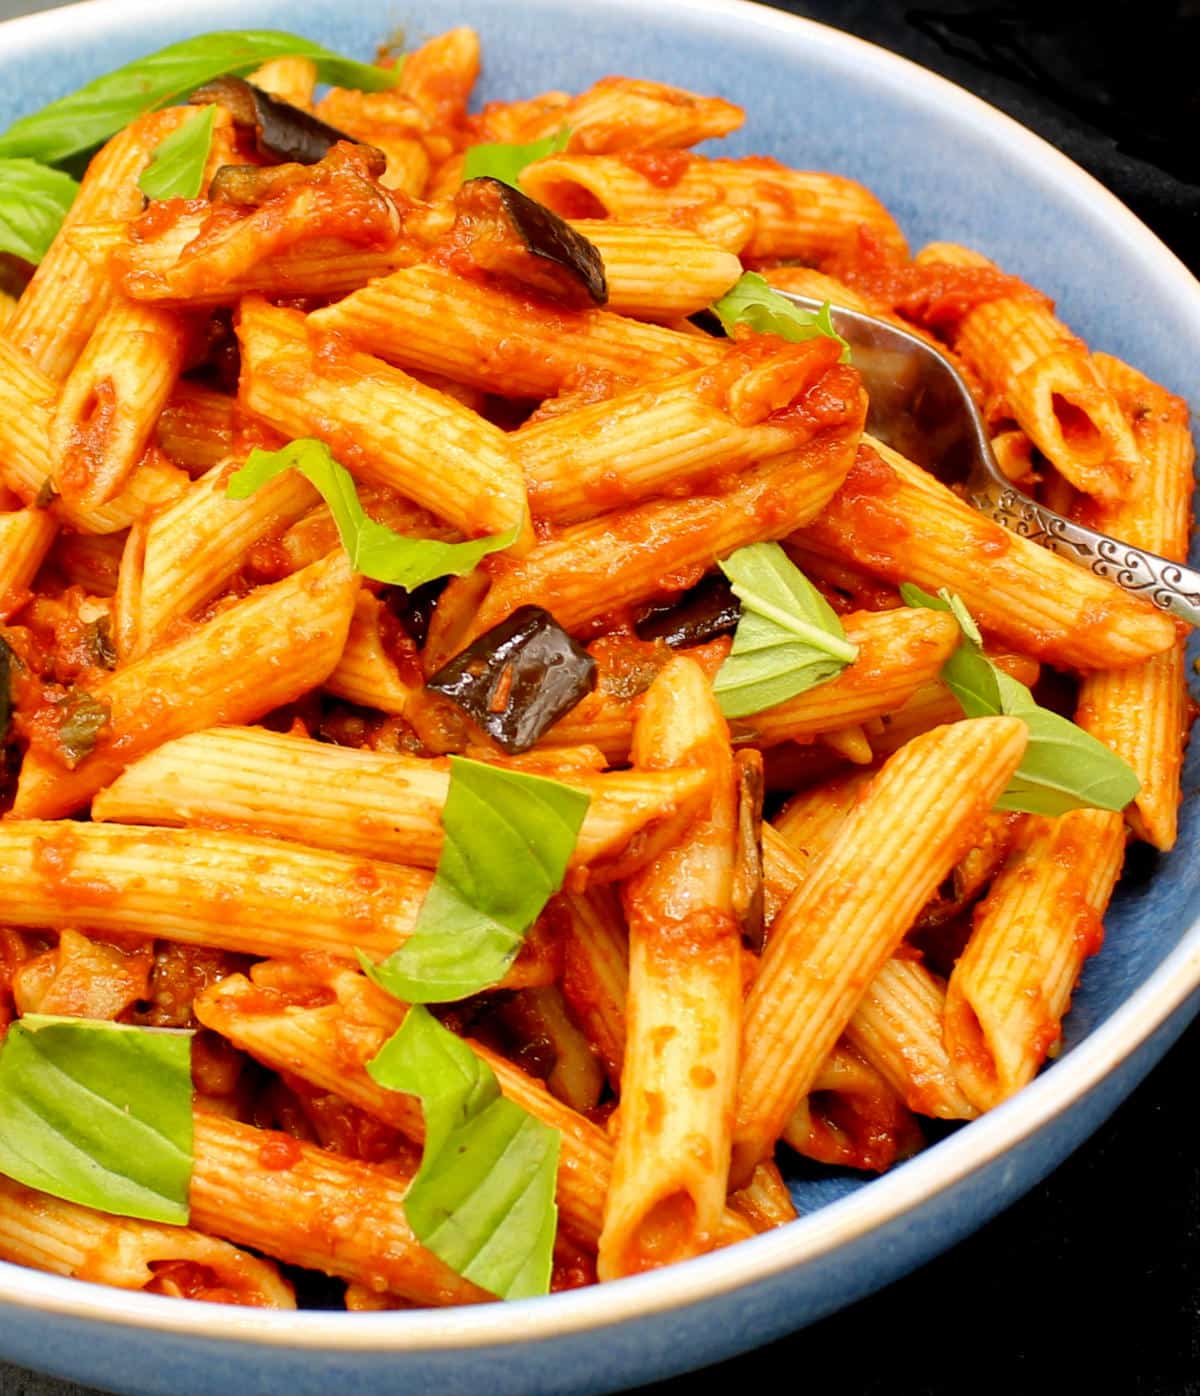 Pasta alla Norma in a blue bowl with basil.